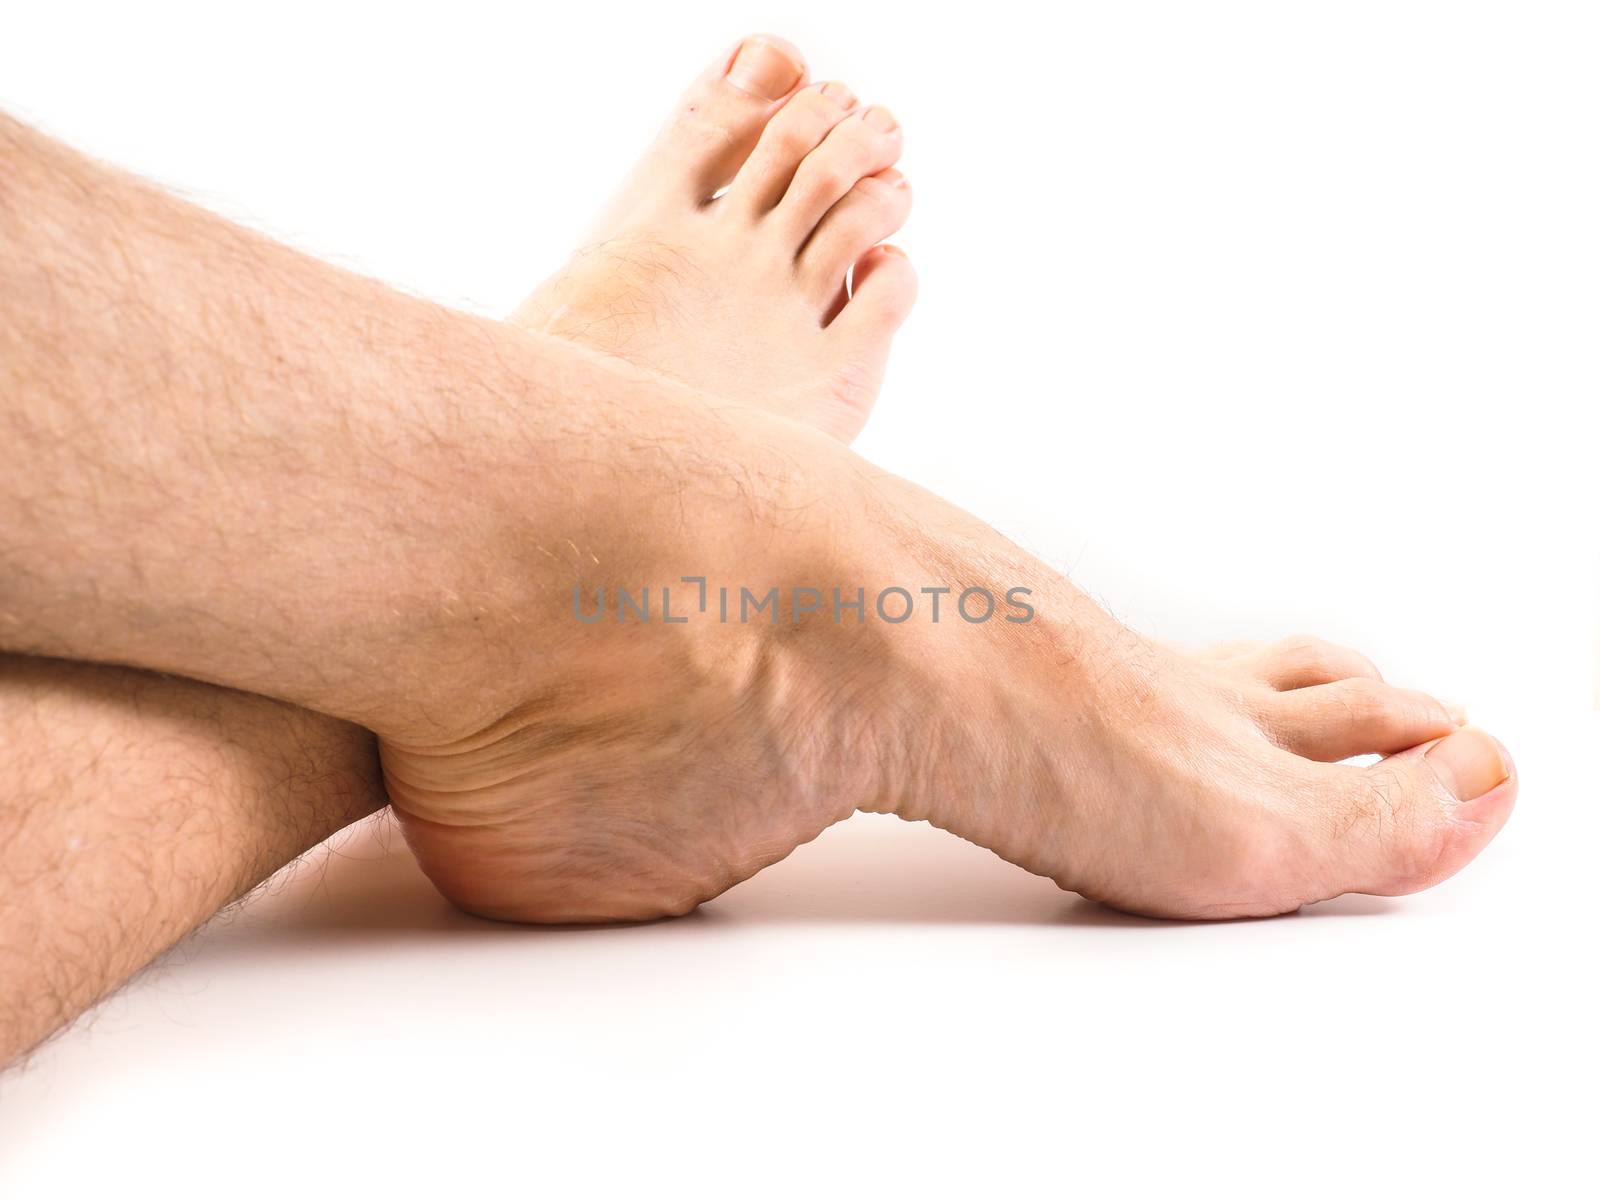 Hairy legs and feet of male person resting by Arvebettum